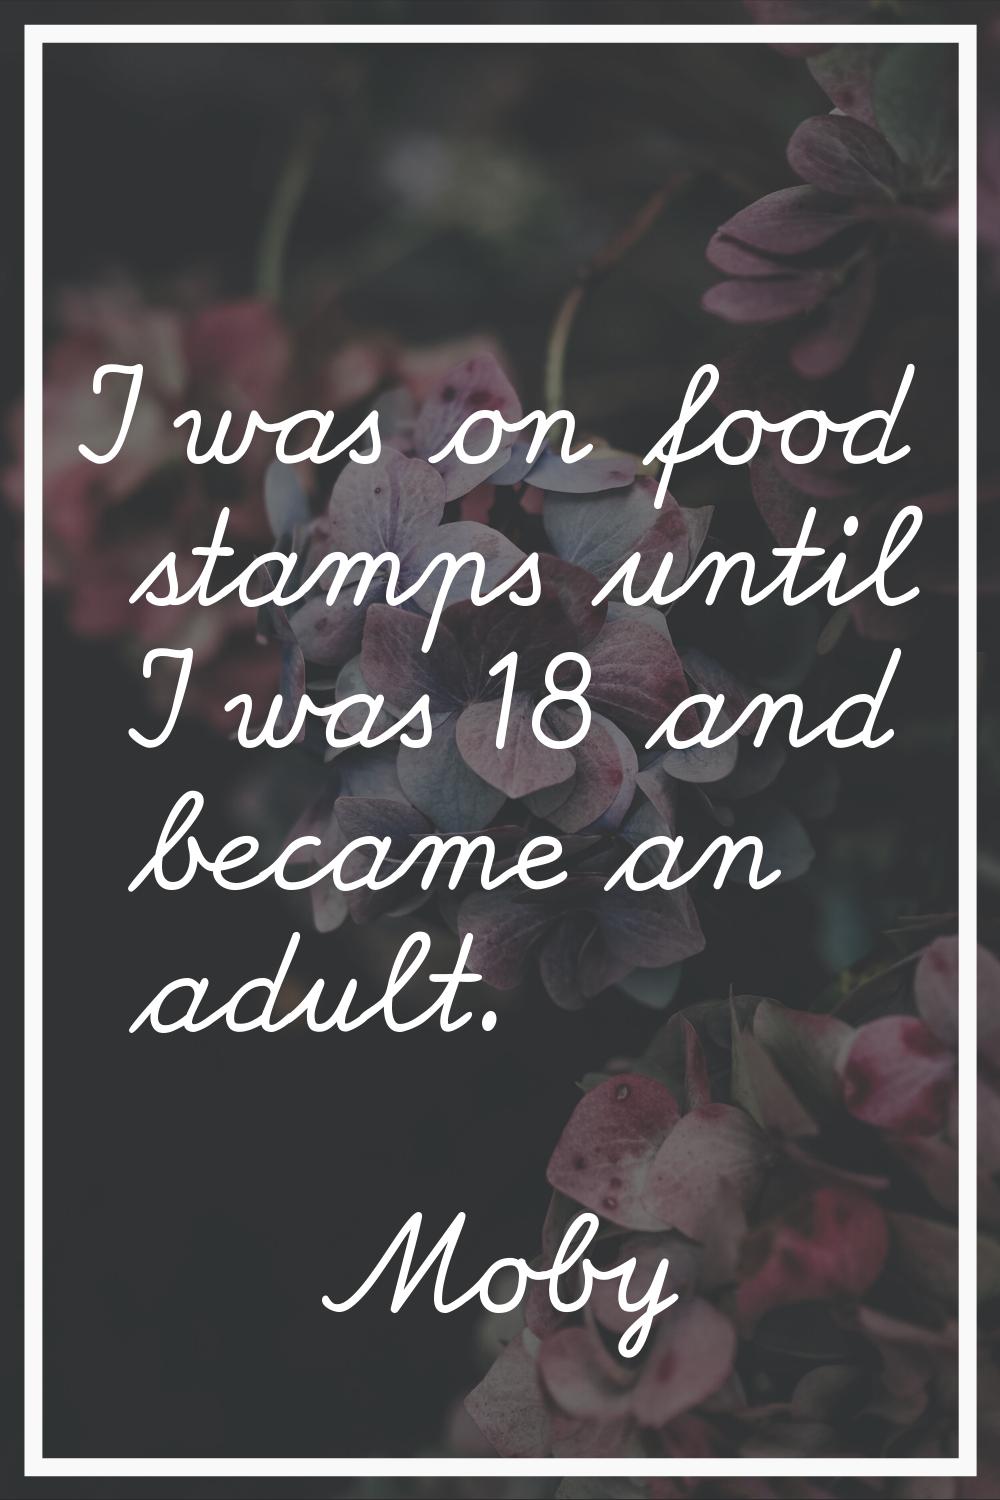 I was on food stamps until I was 18 and became an adult.